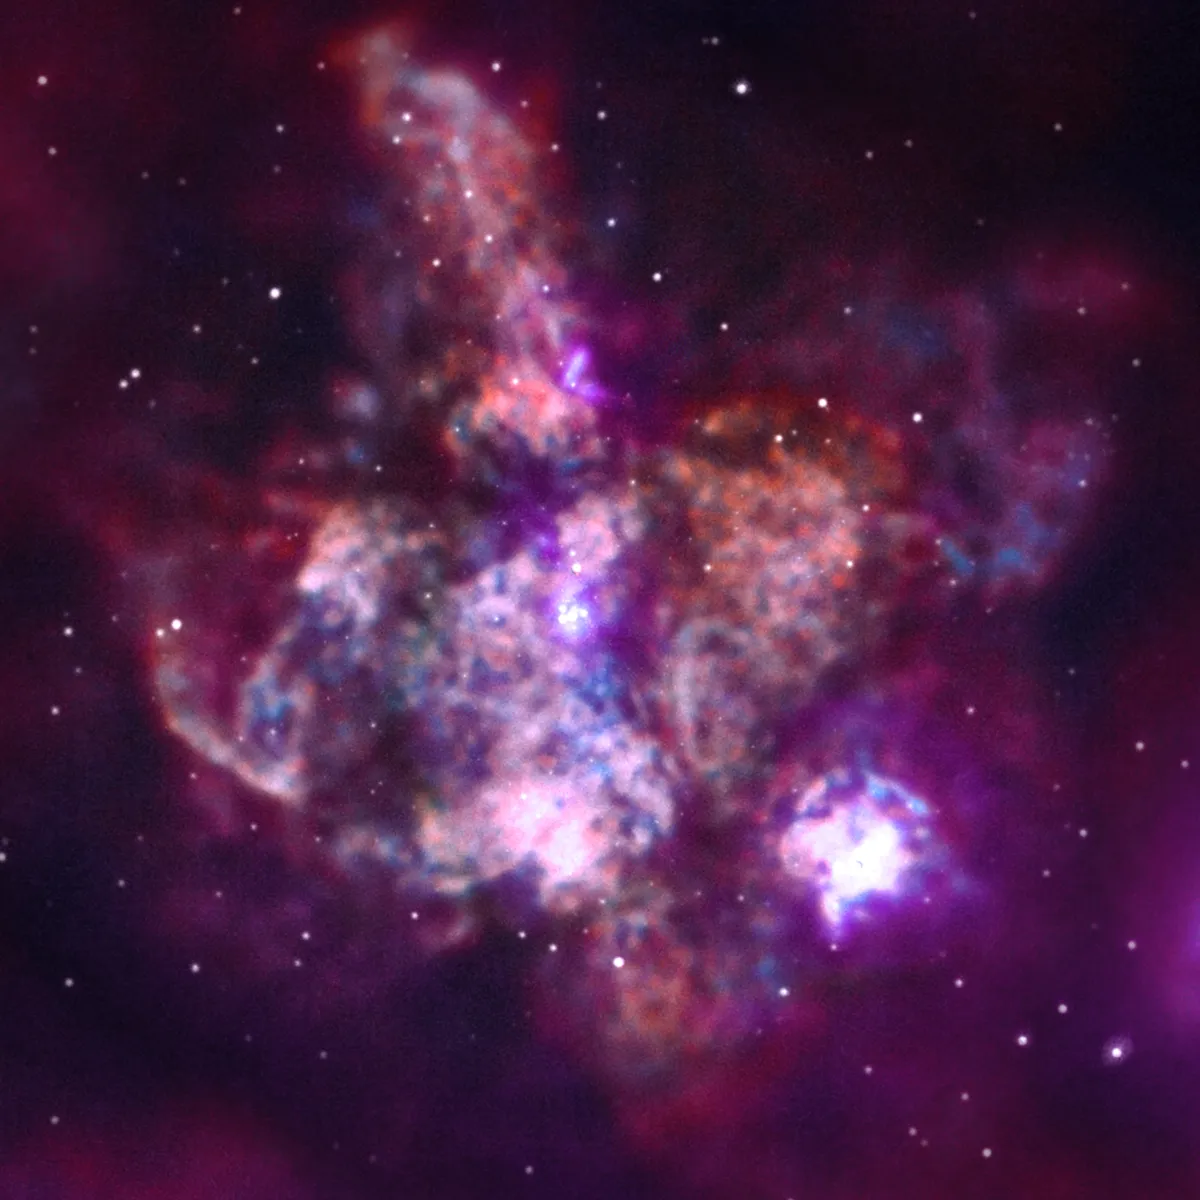 30 Doradus Also known as the Tarantula Nebula, this is one of the largest star-forming regions near the Milky Way. Chandra can observe gas that is being heated to millions of degrees by the streams of charged particles released by hot young stars, known as 'stellar winds'. Credit: NASA/CXC/Penn State Univ./L. Townsley et al.